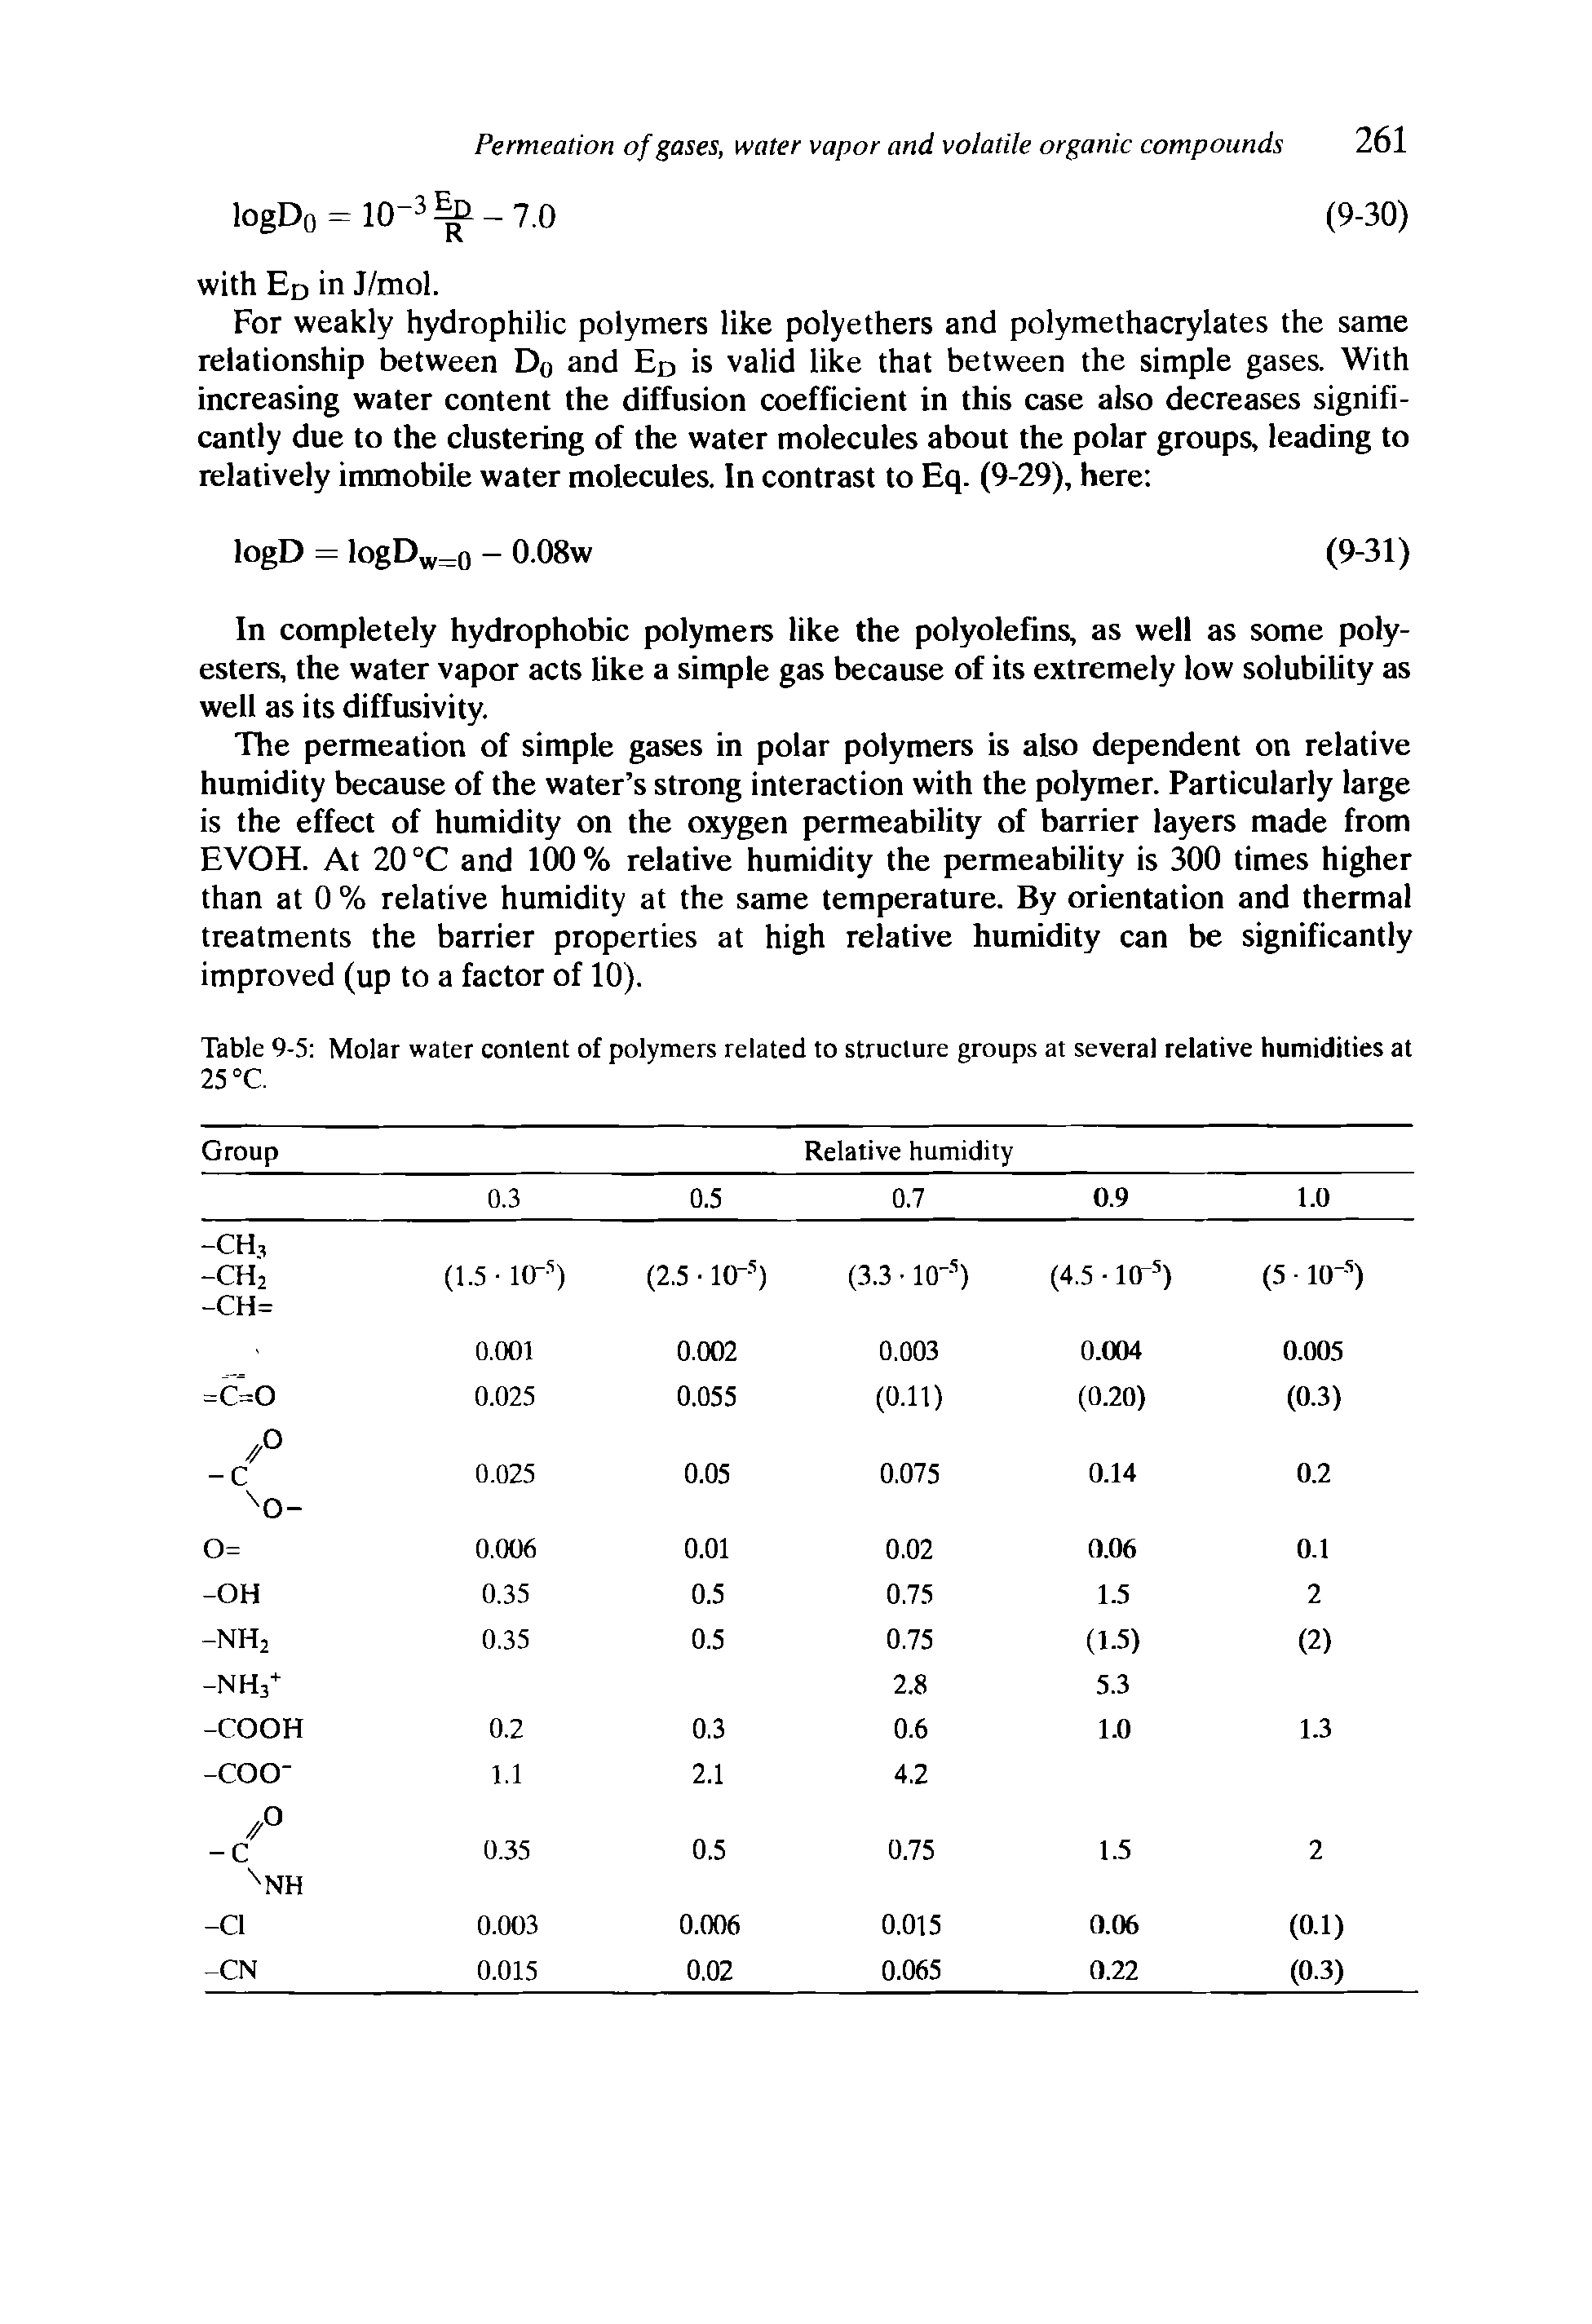 Table 9-5 Molar water content of polymers related to structure groups at several relative humidities at 25 °C.